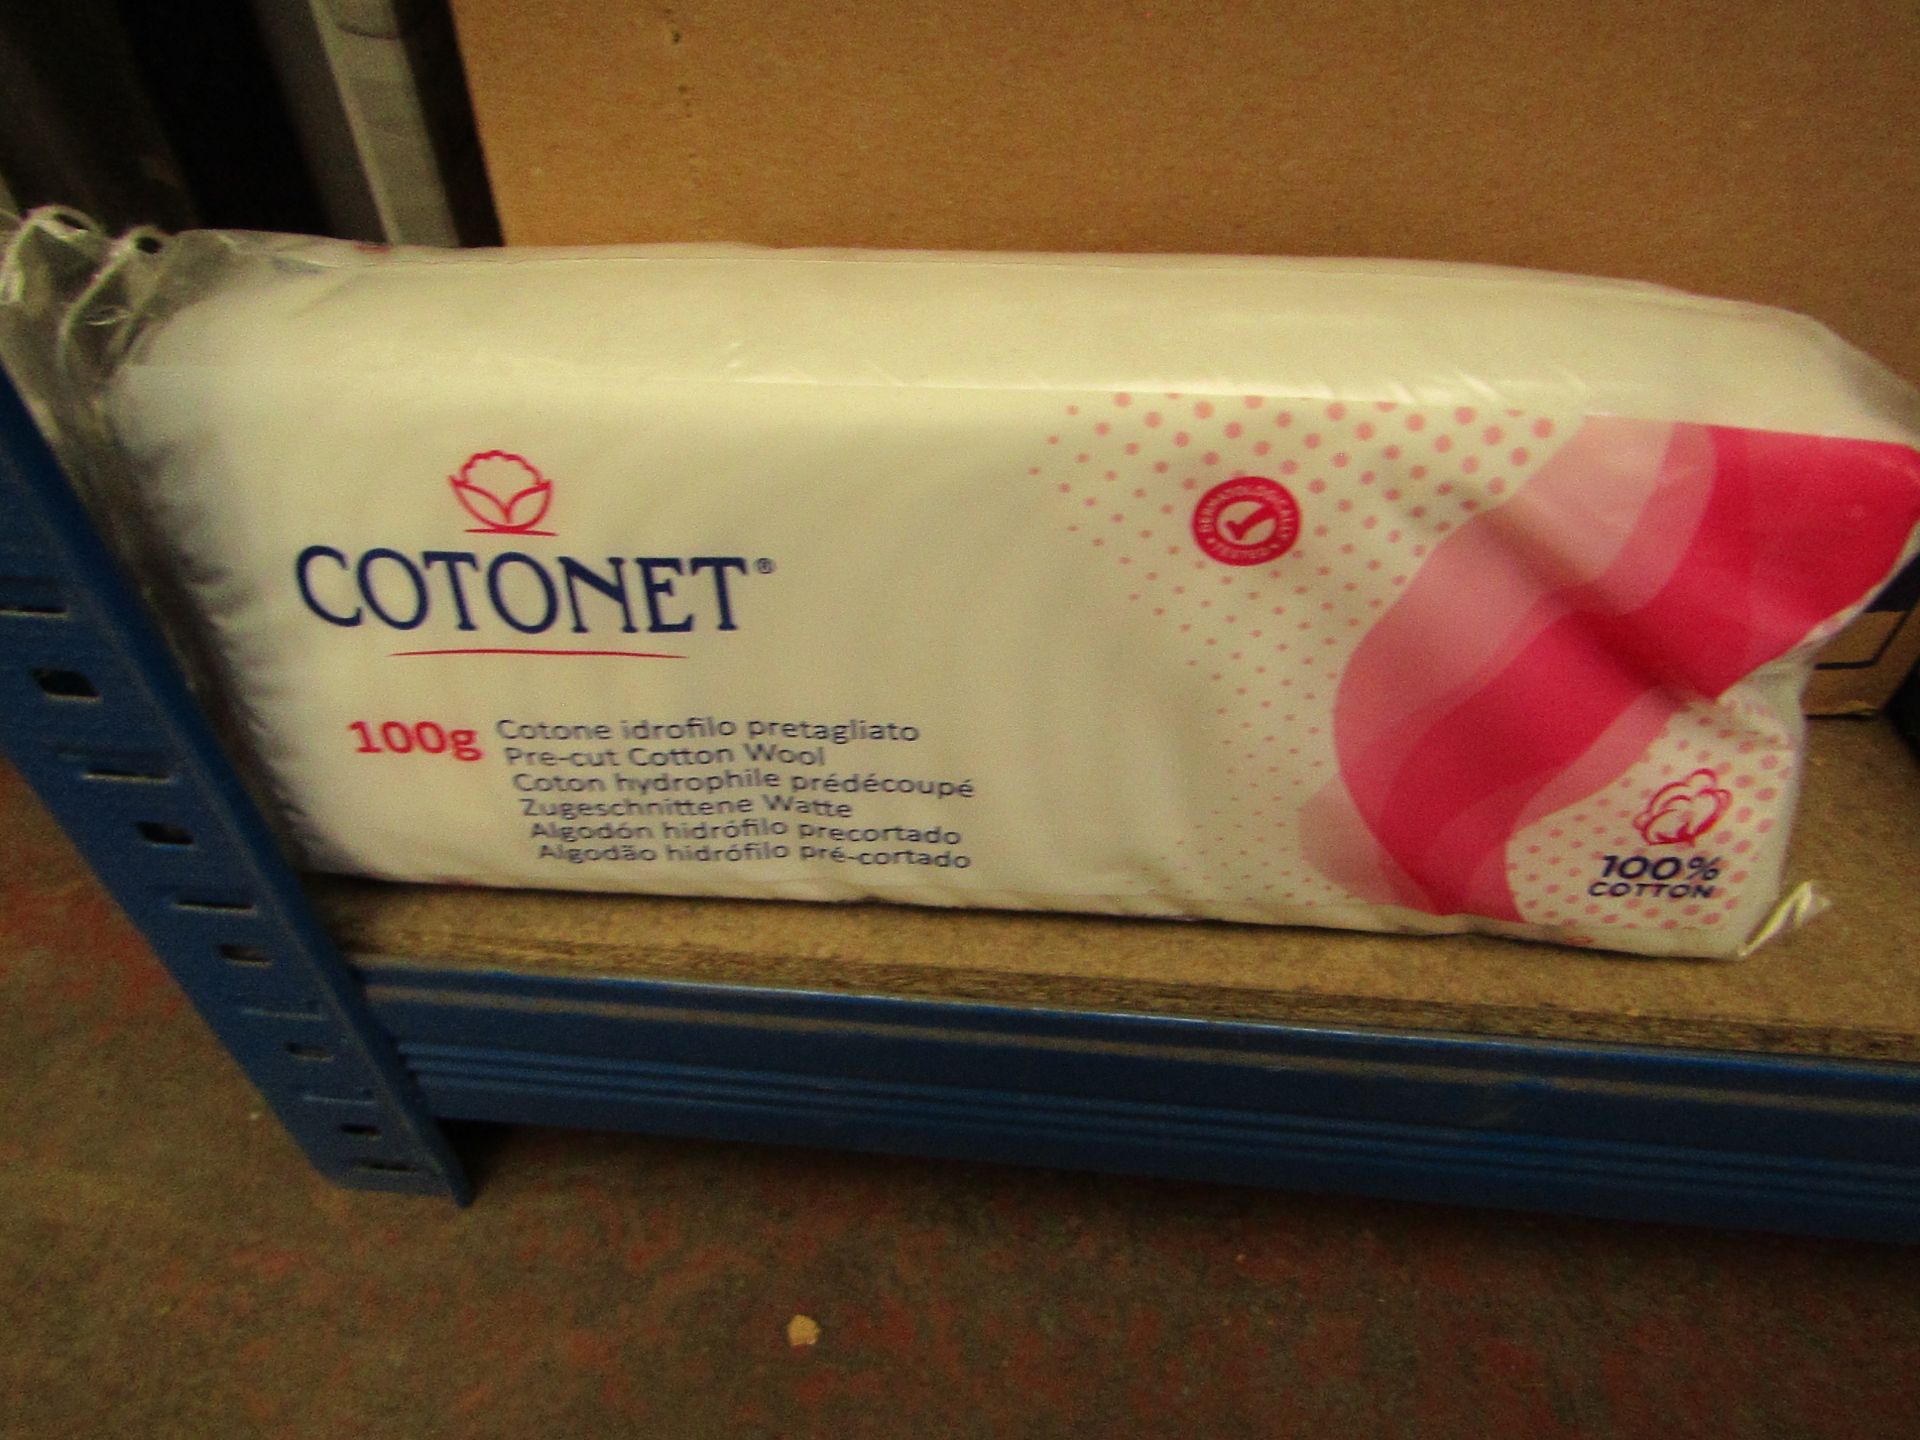 Approx 10x Cotonet 100g pre-cut cotton wool, new and packaged.